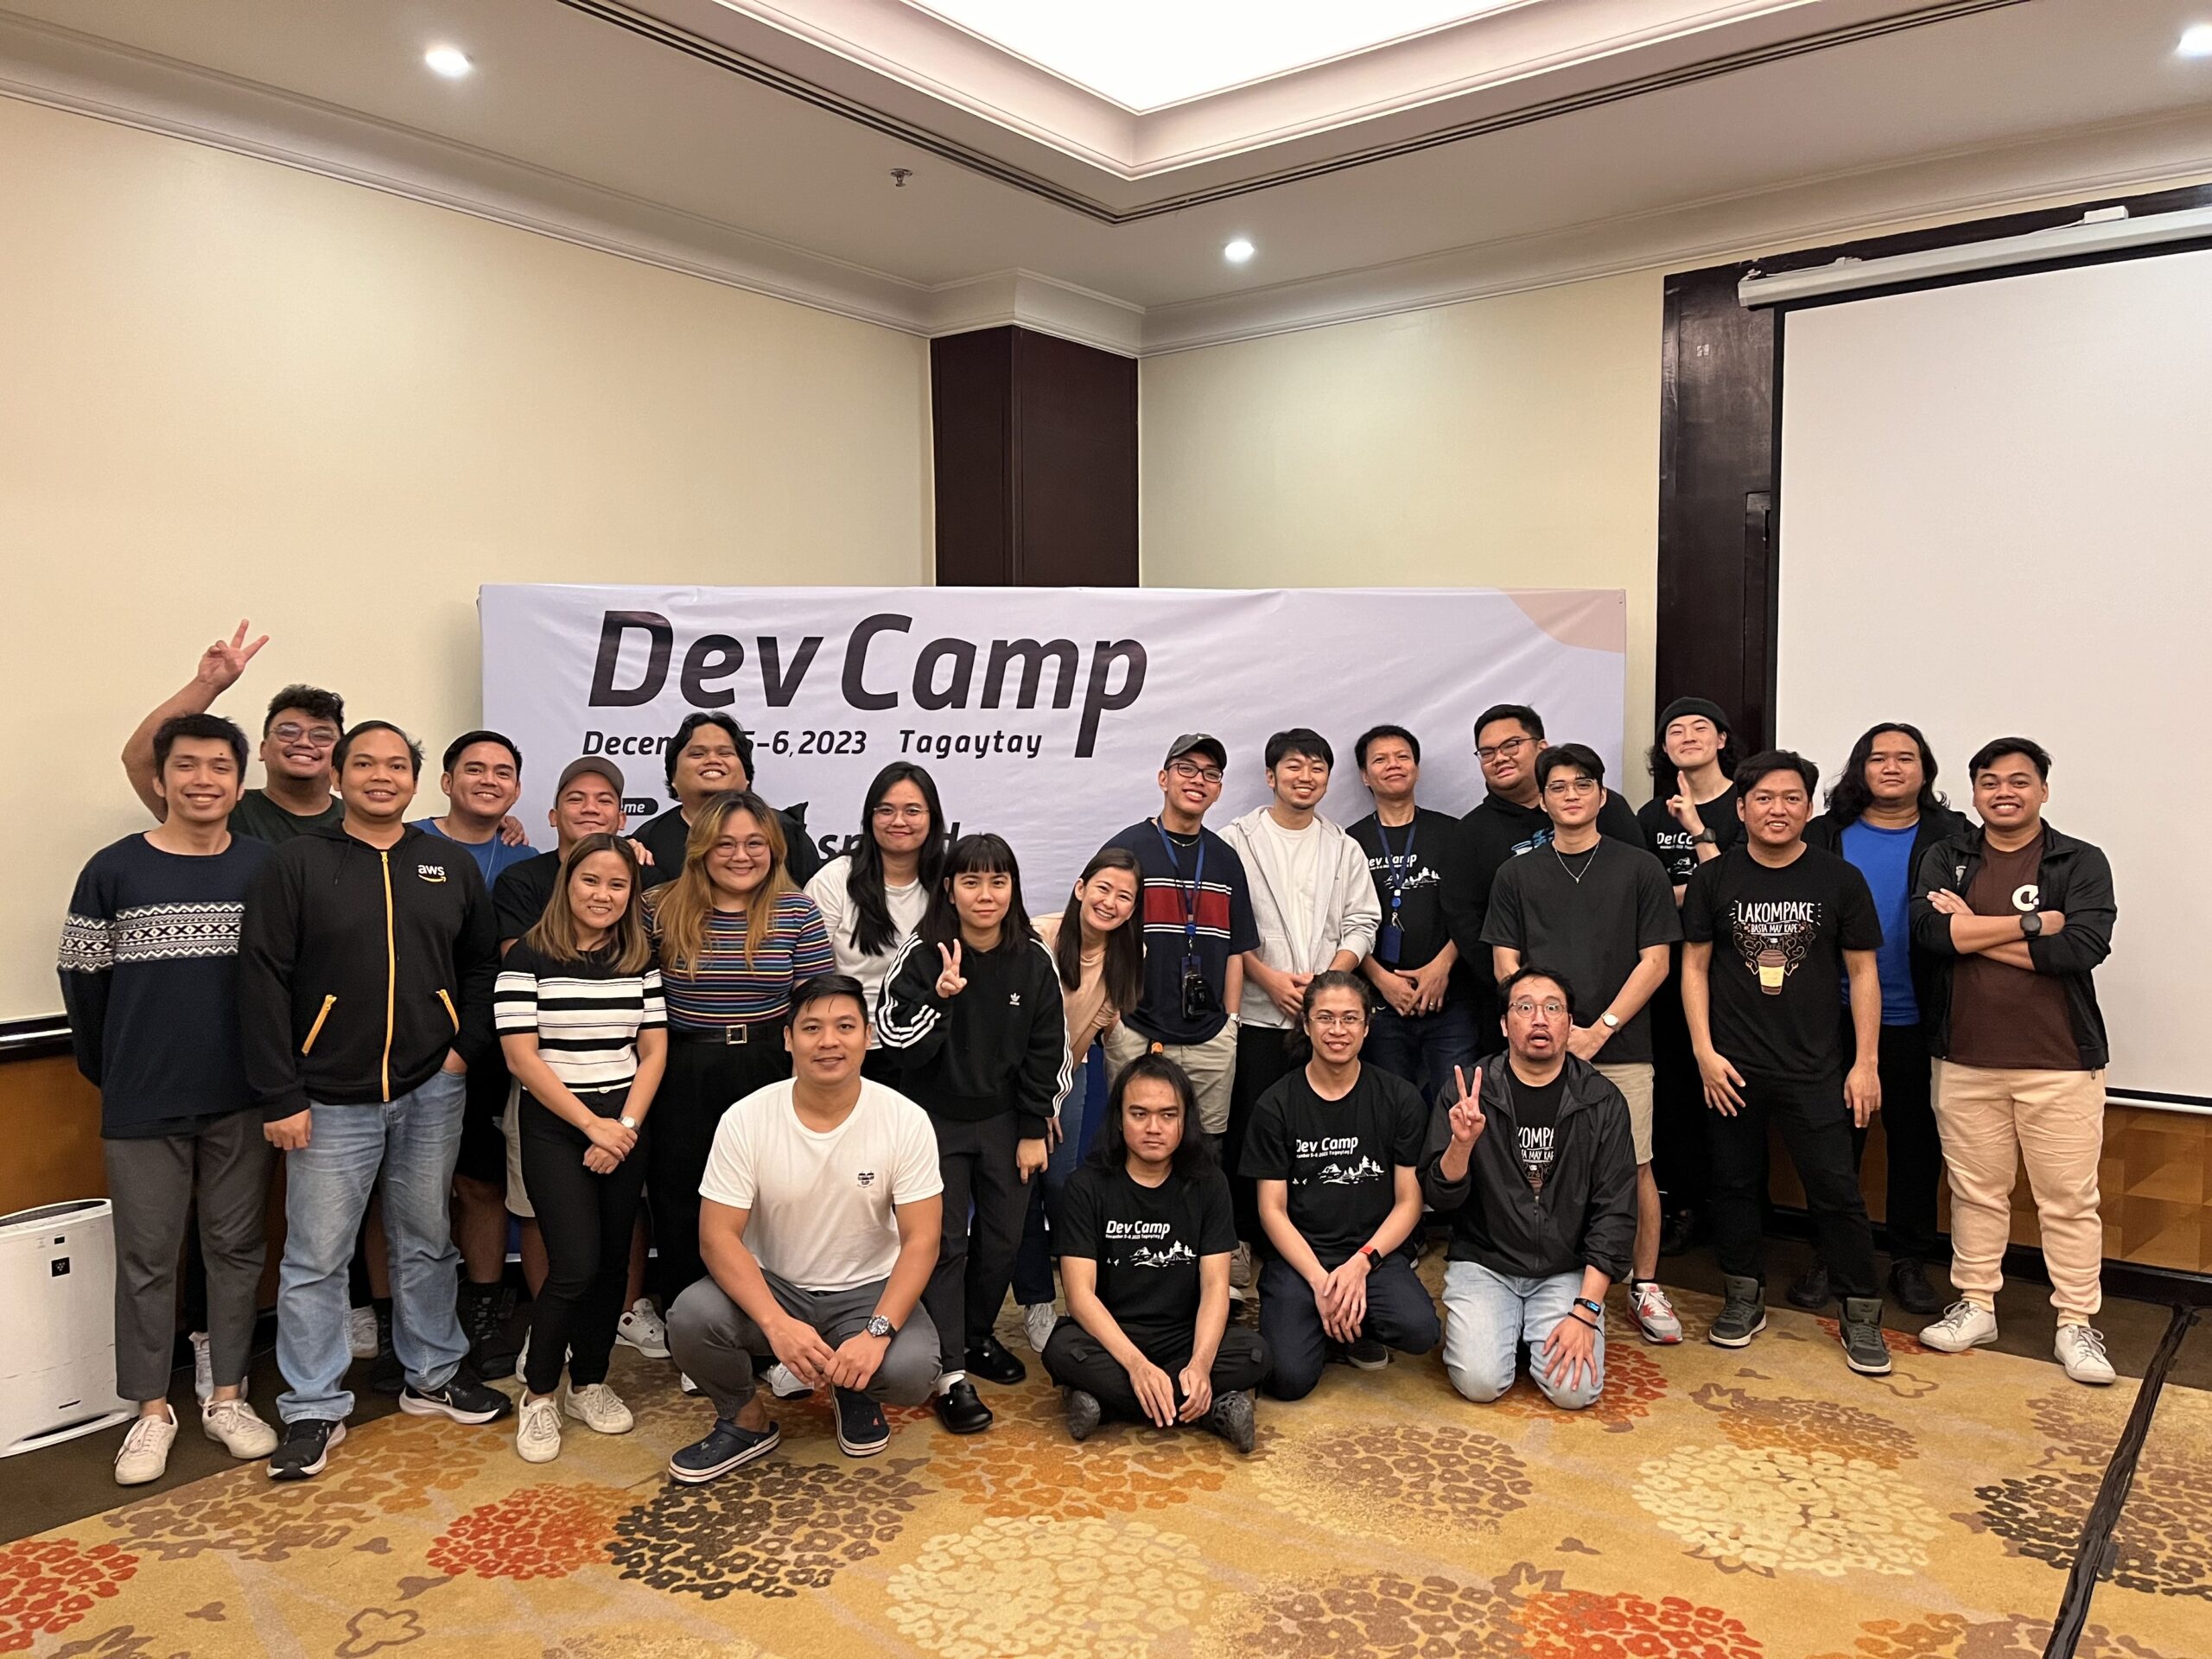 First Week Into Tech: My DevCamp Experience in Tagaytay